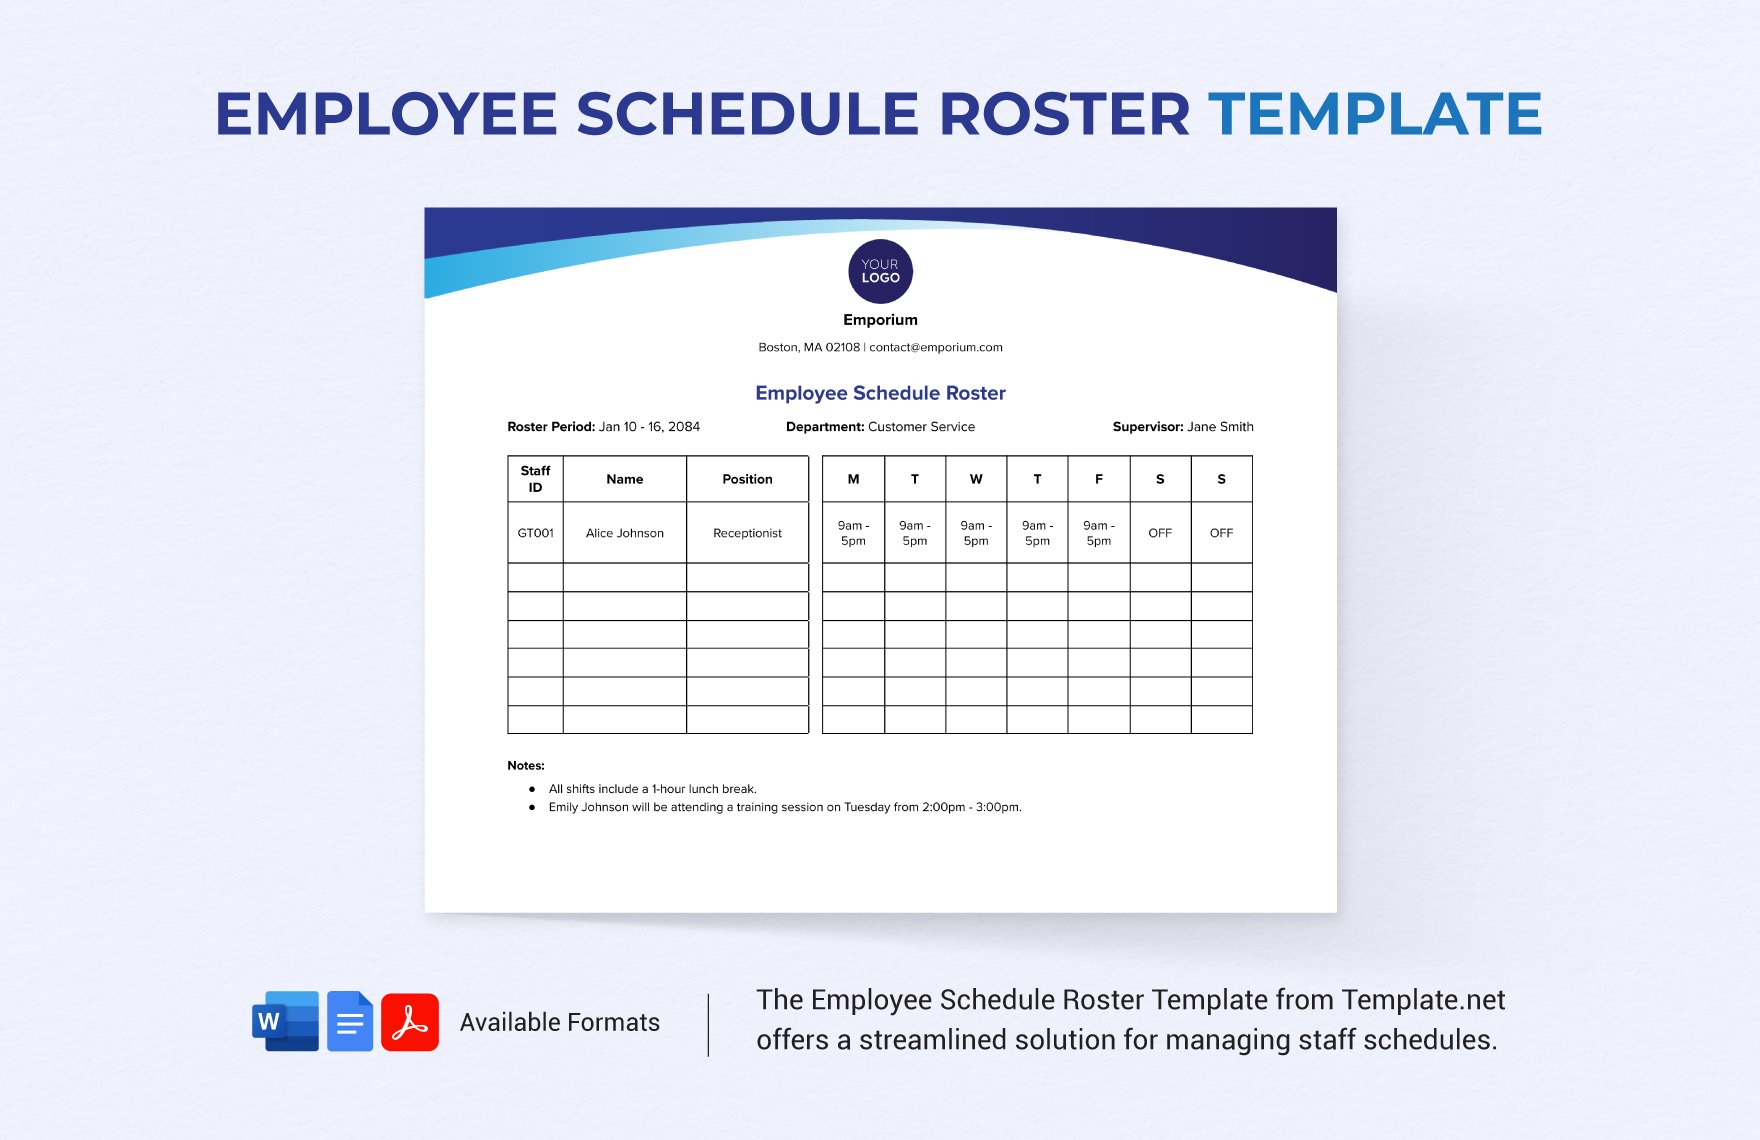 Employee Schedule Roster Template